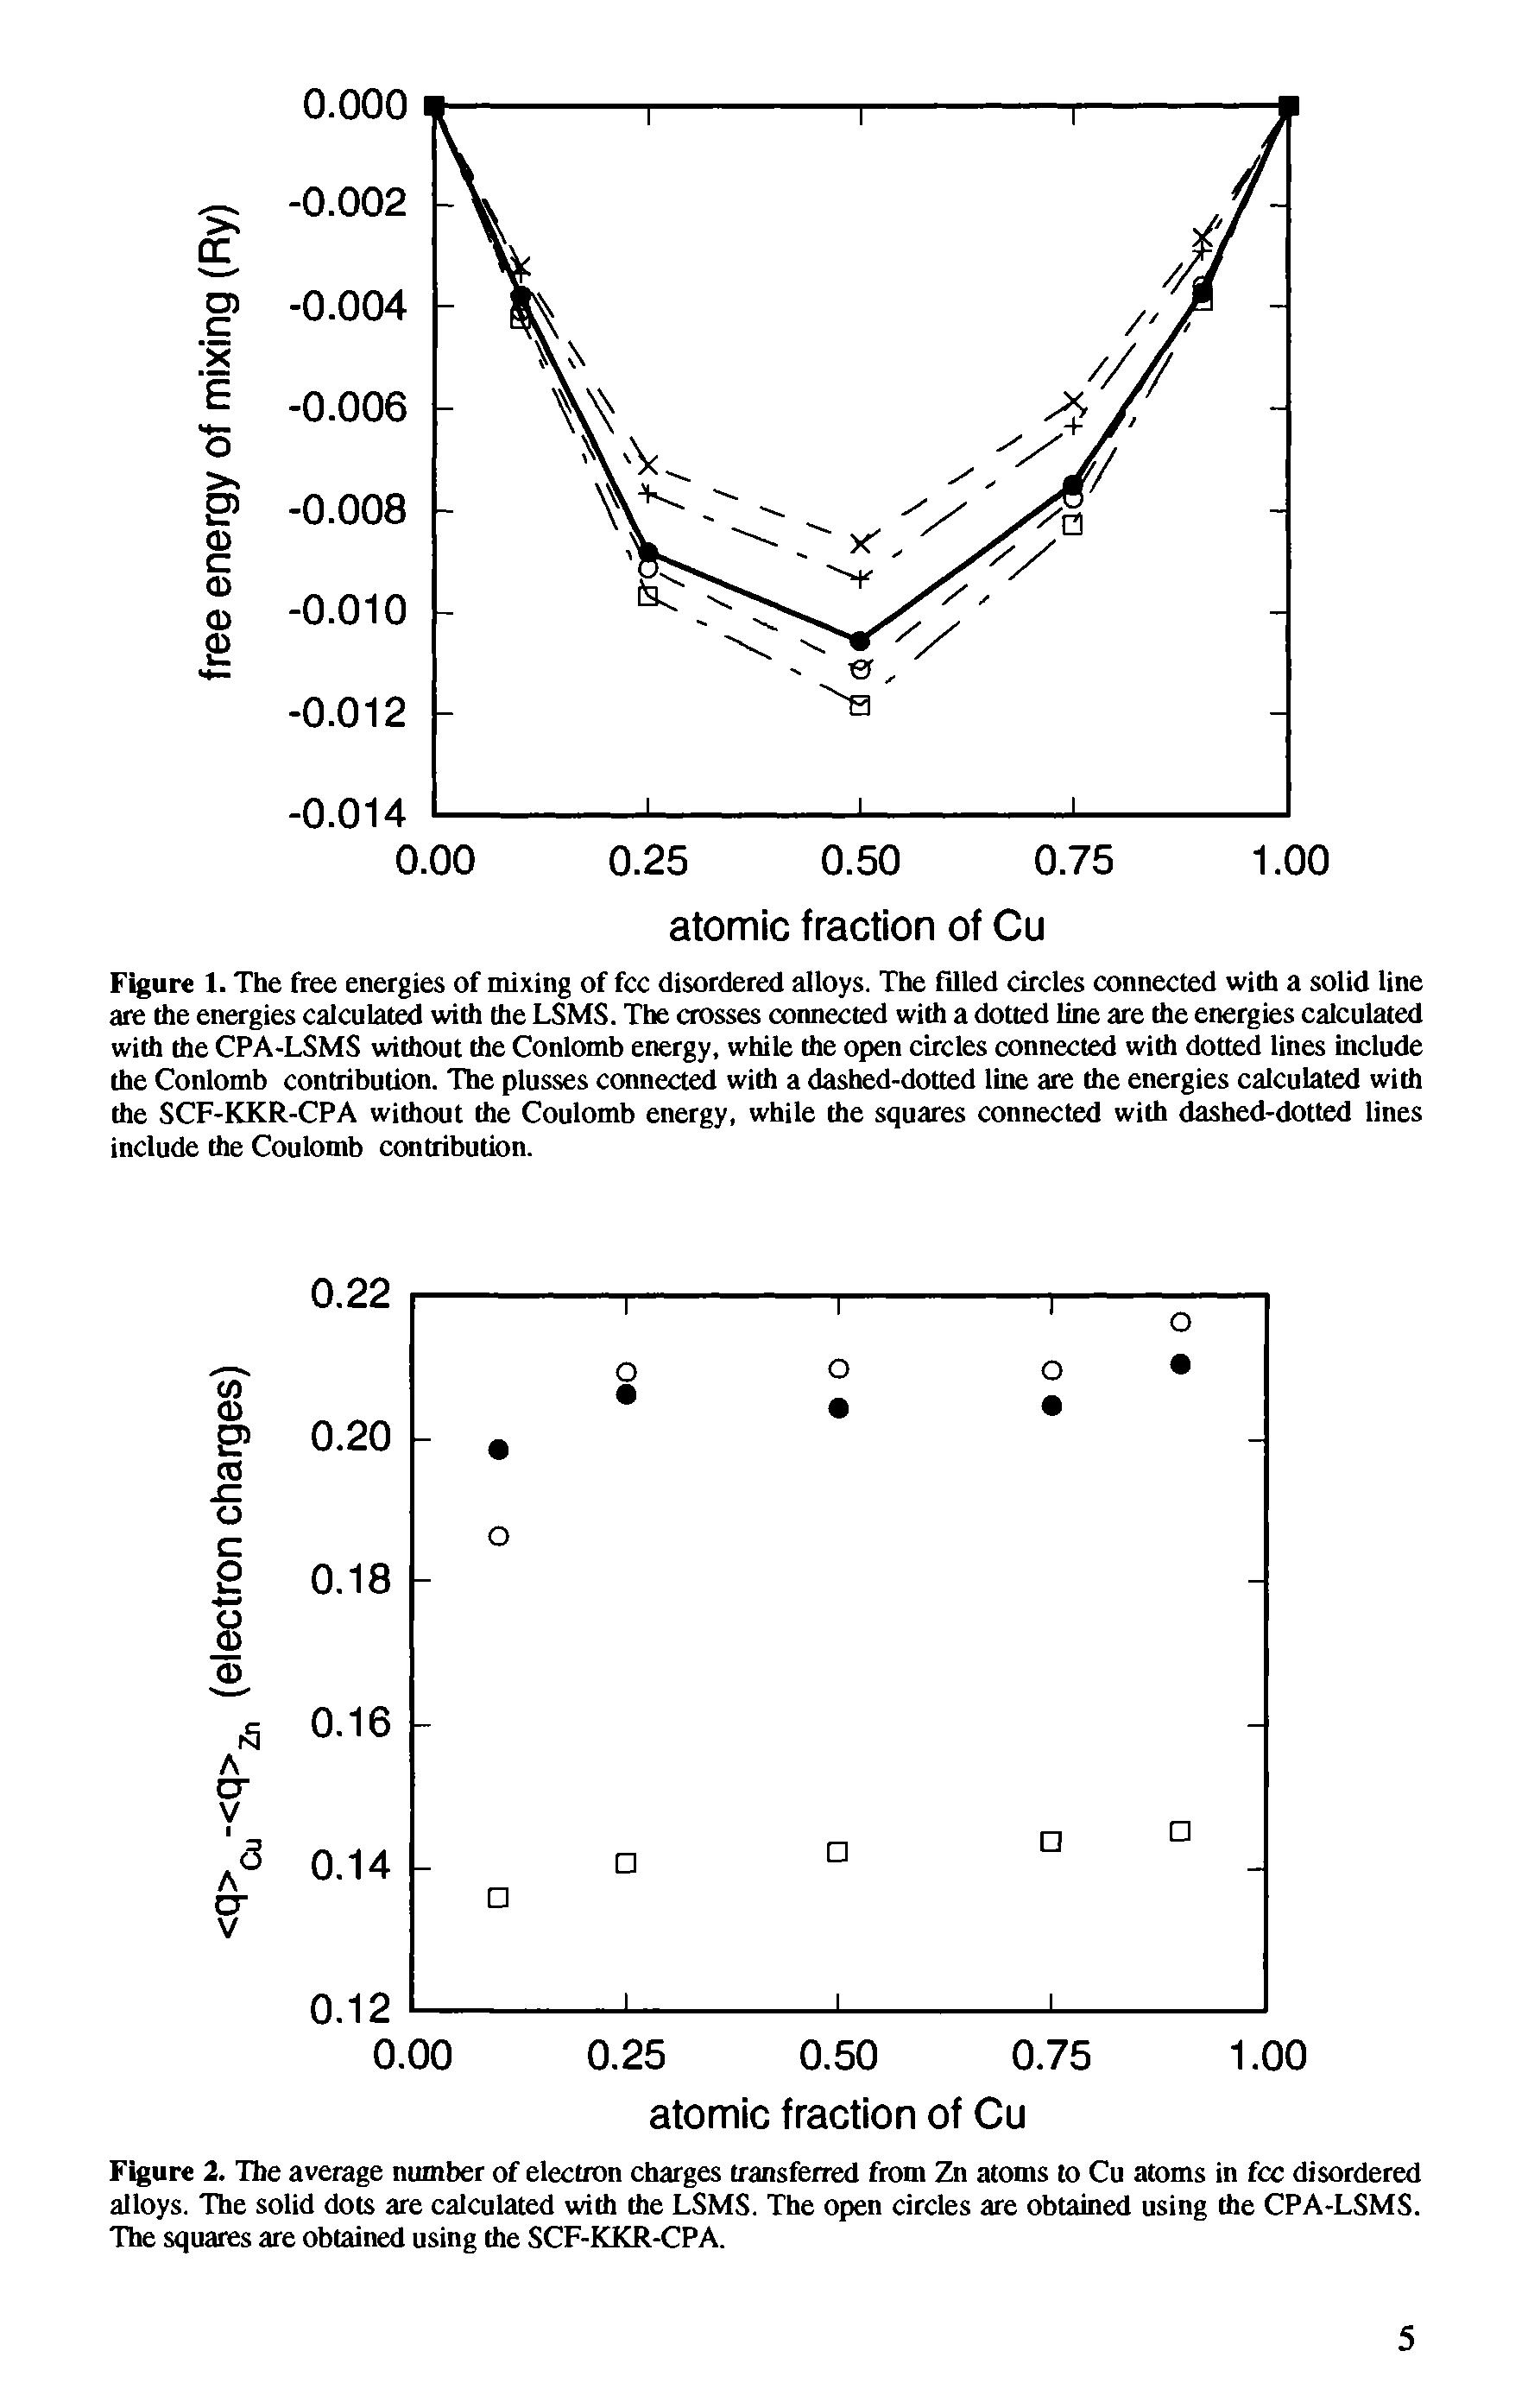 Figure 2. The average number of electron charges transferred from Zn atoms to Cu atoms in fee disordered alloys. The solid dots are calculated with the LSMS. The open circles are obtained using the CPA-LSMS. The squares are obtained using the SCF-KKR-CPA.